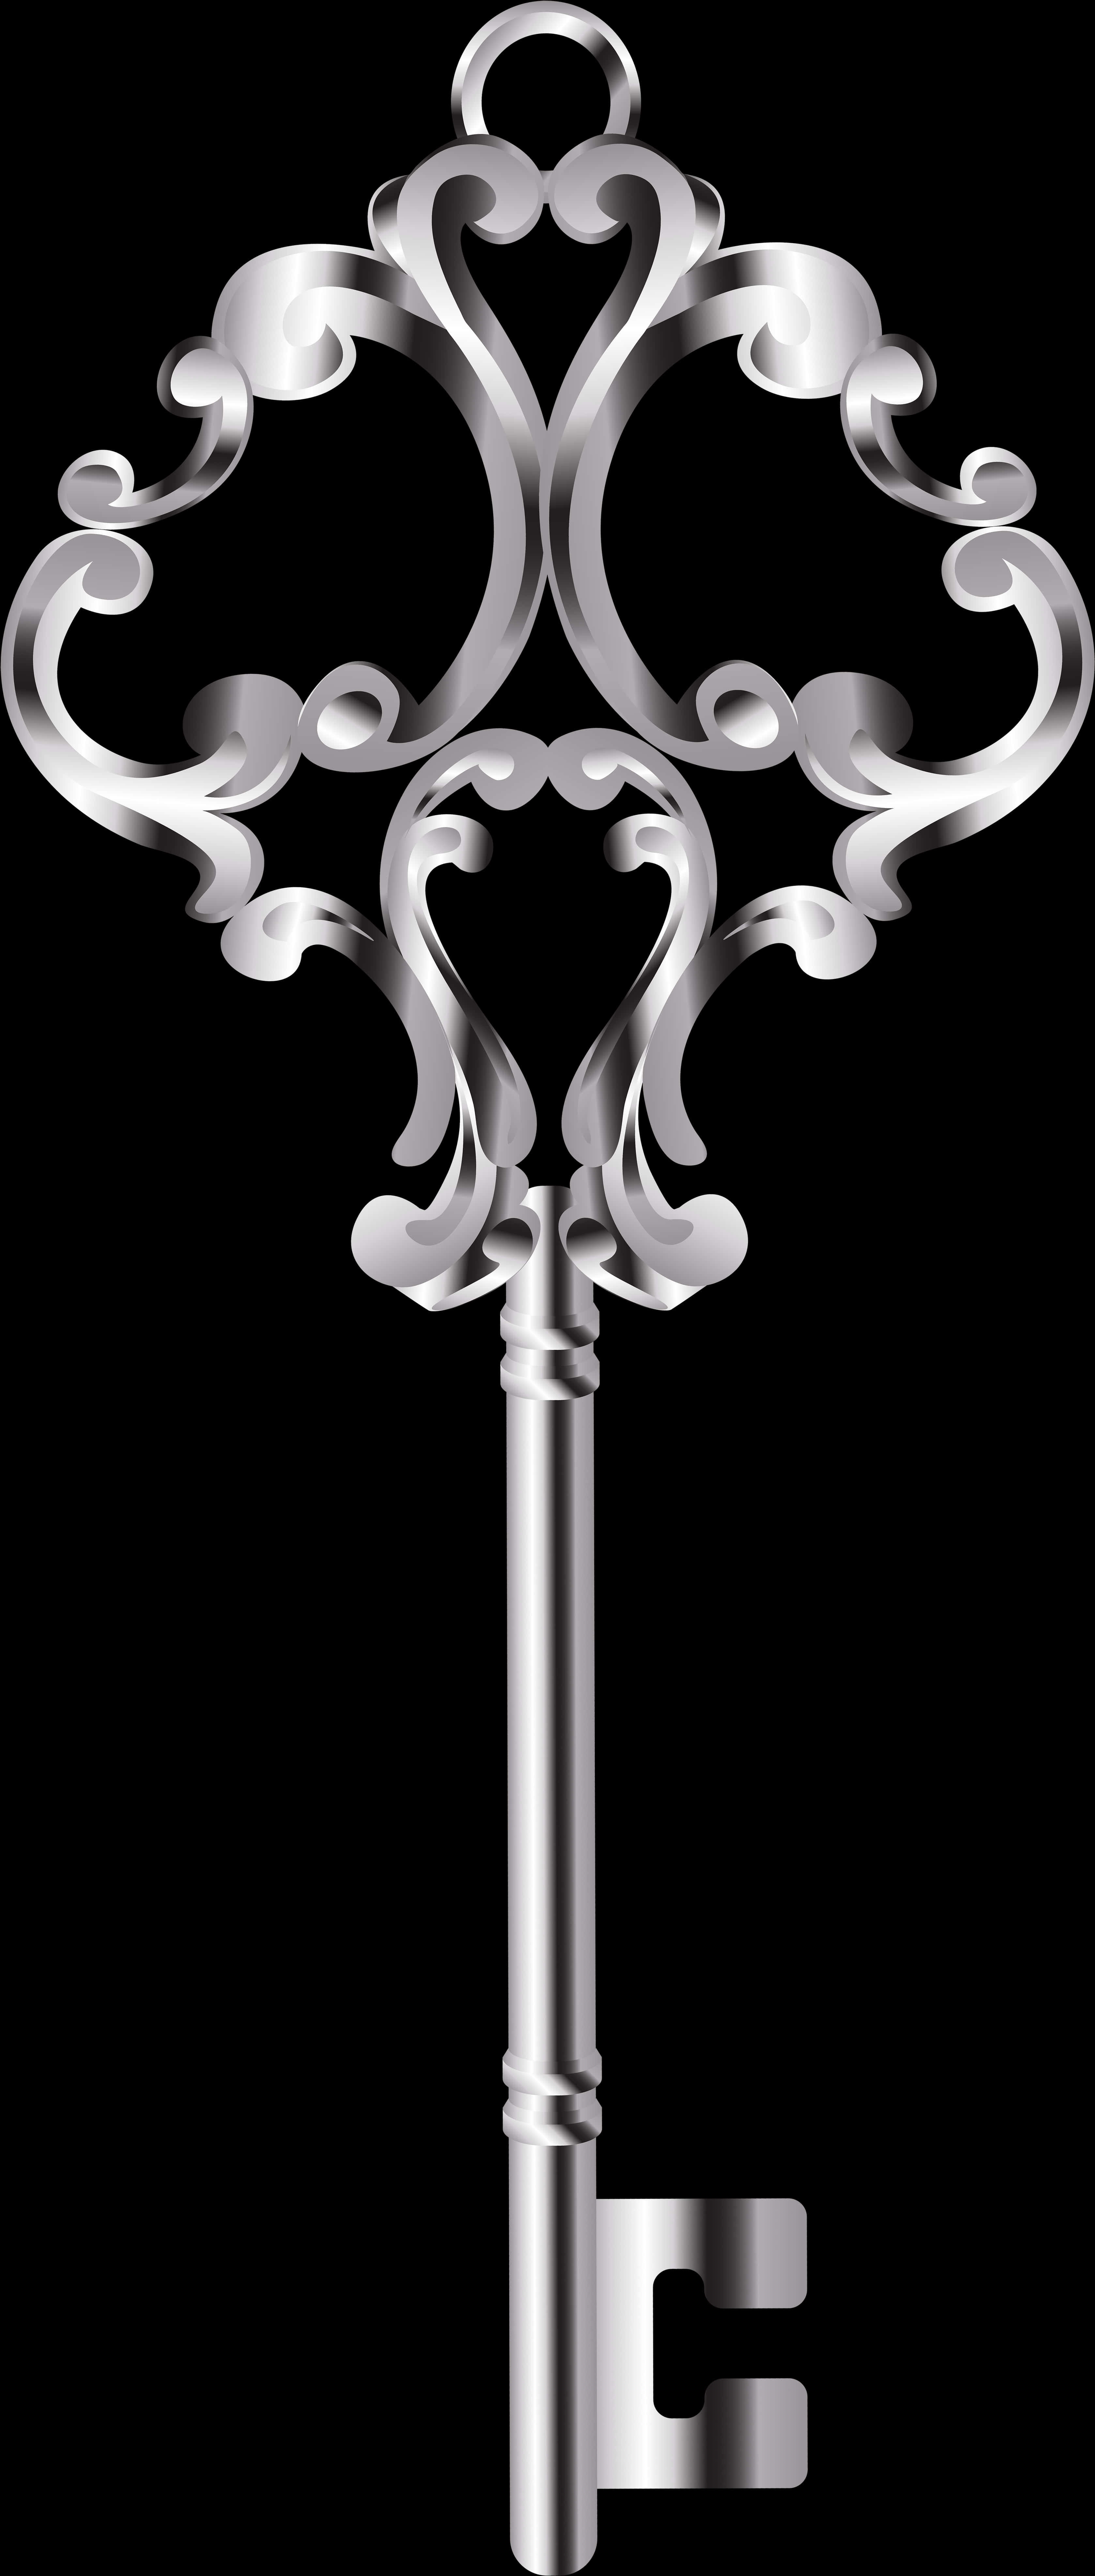 Ornate Silver Key Graphic PNG